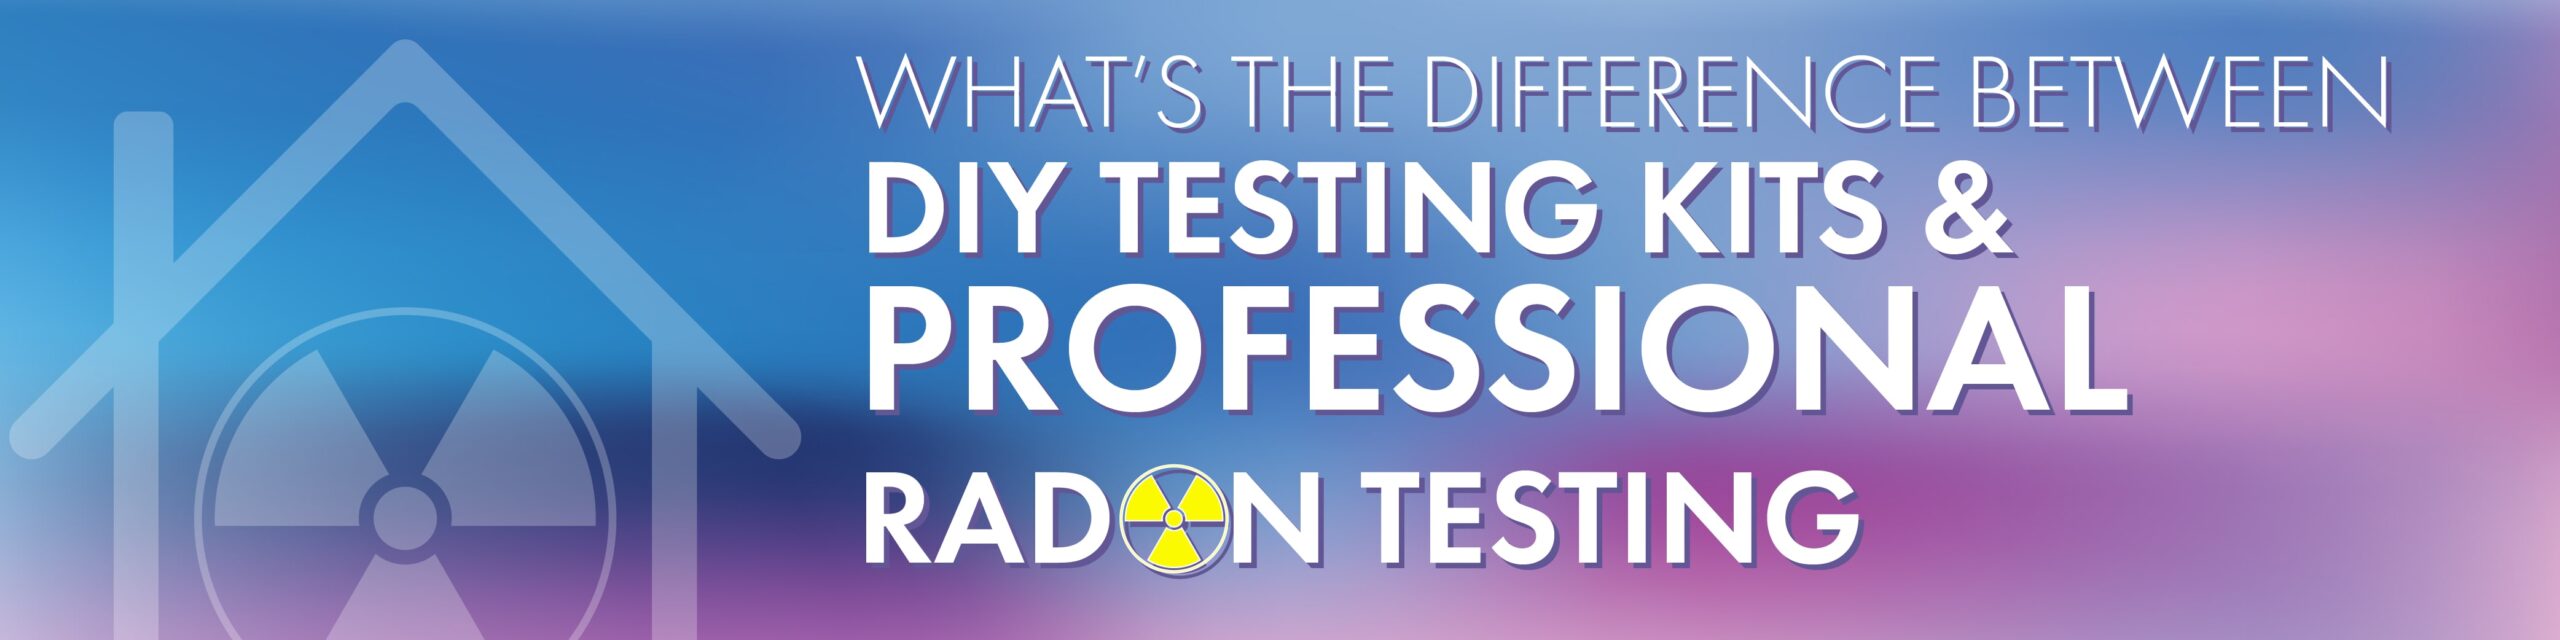 what's the difference between DIY testing kits and professional radon testing